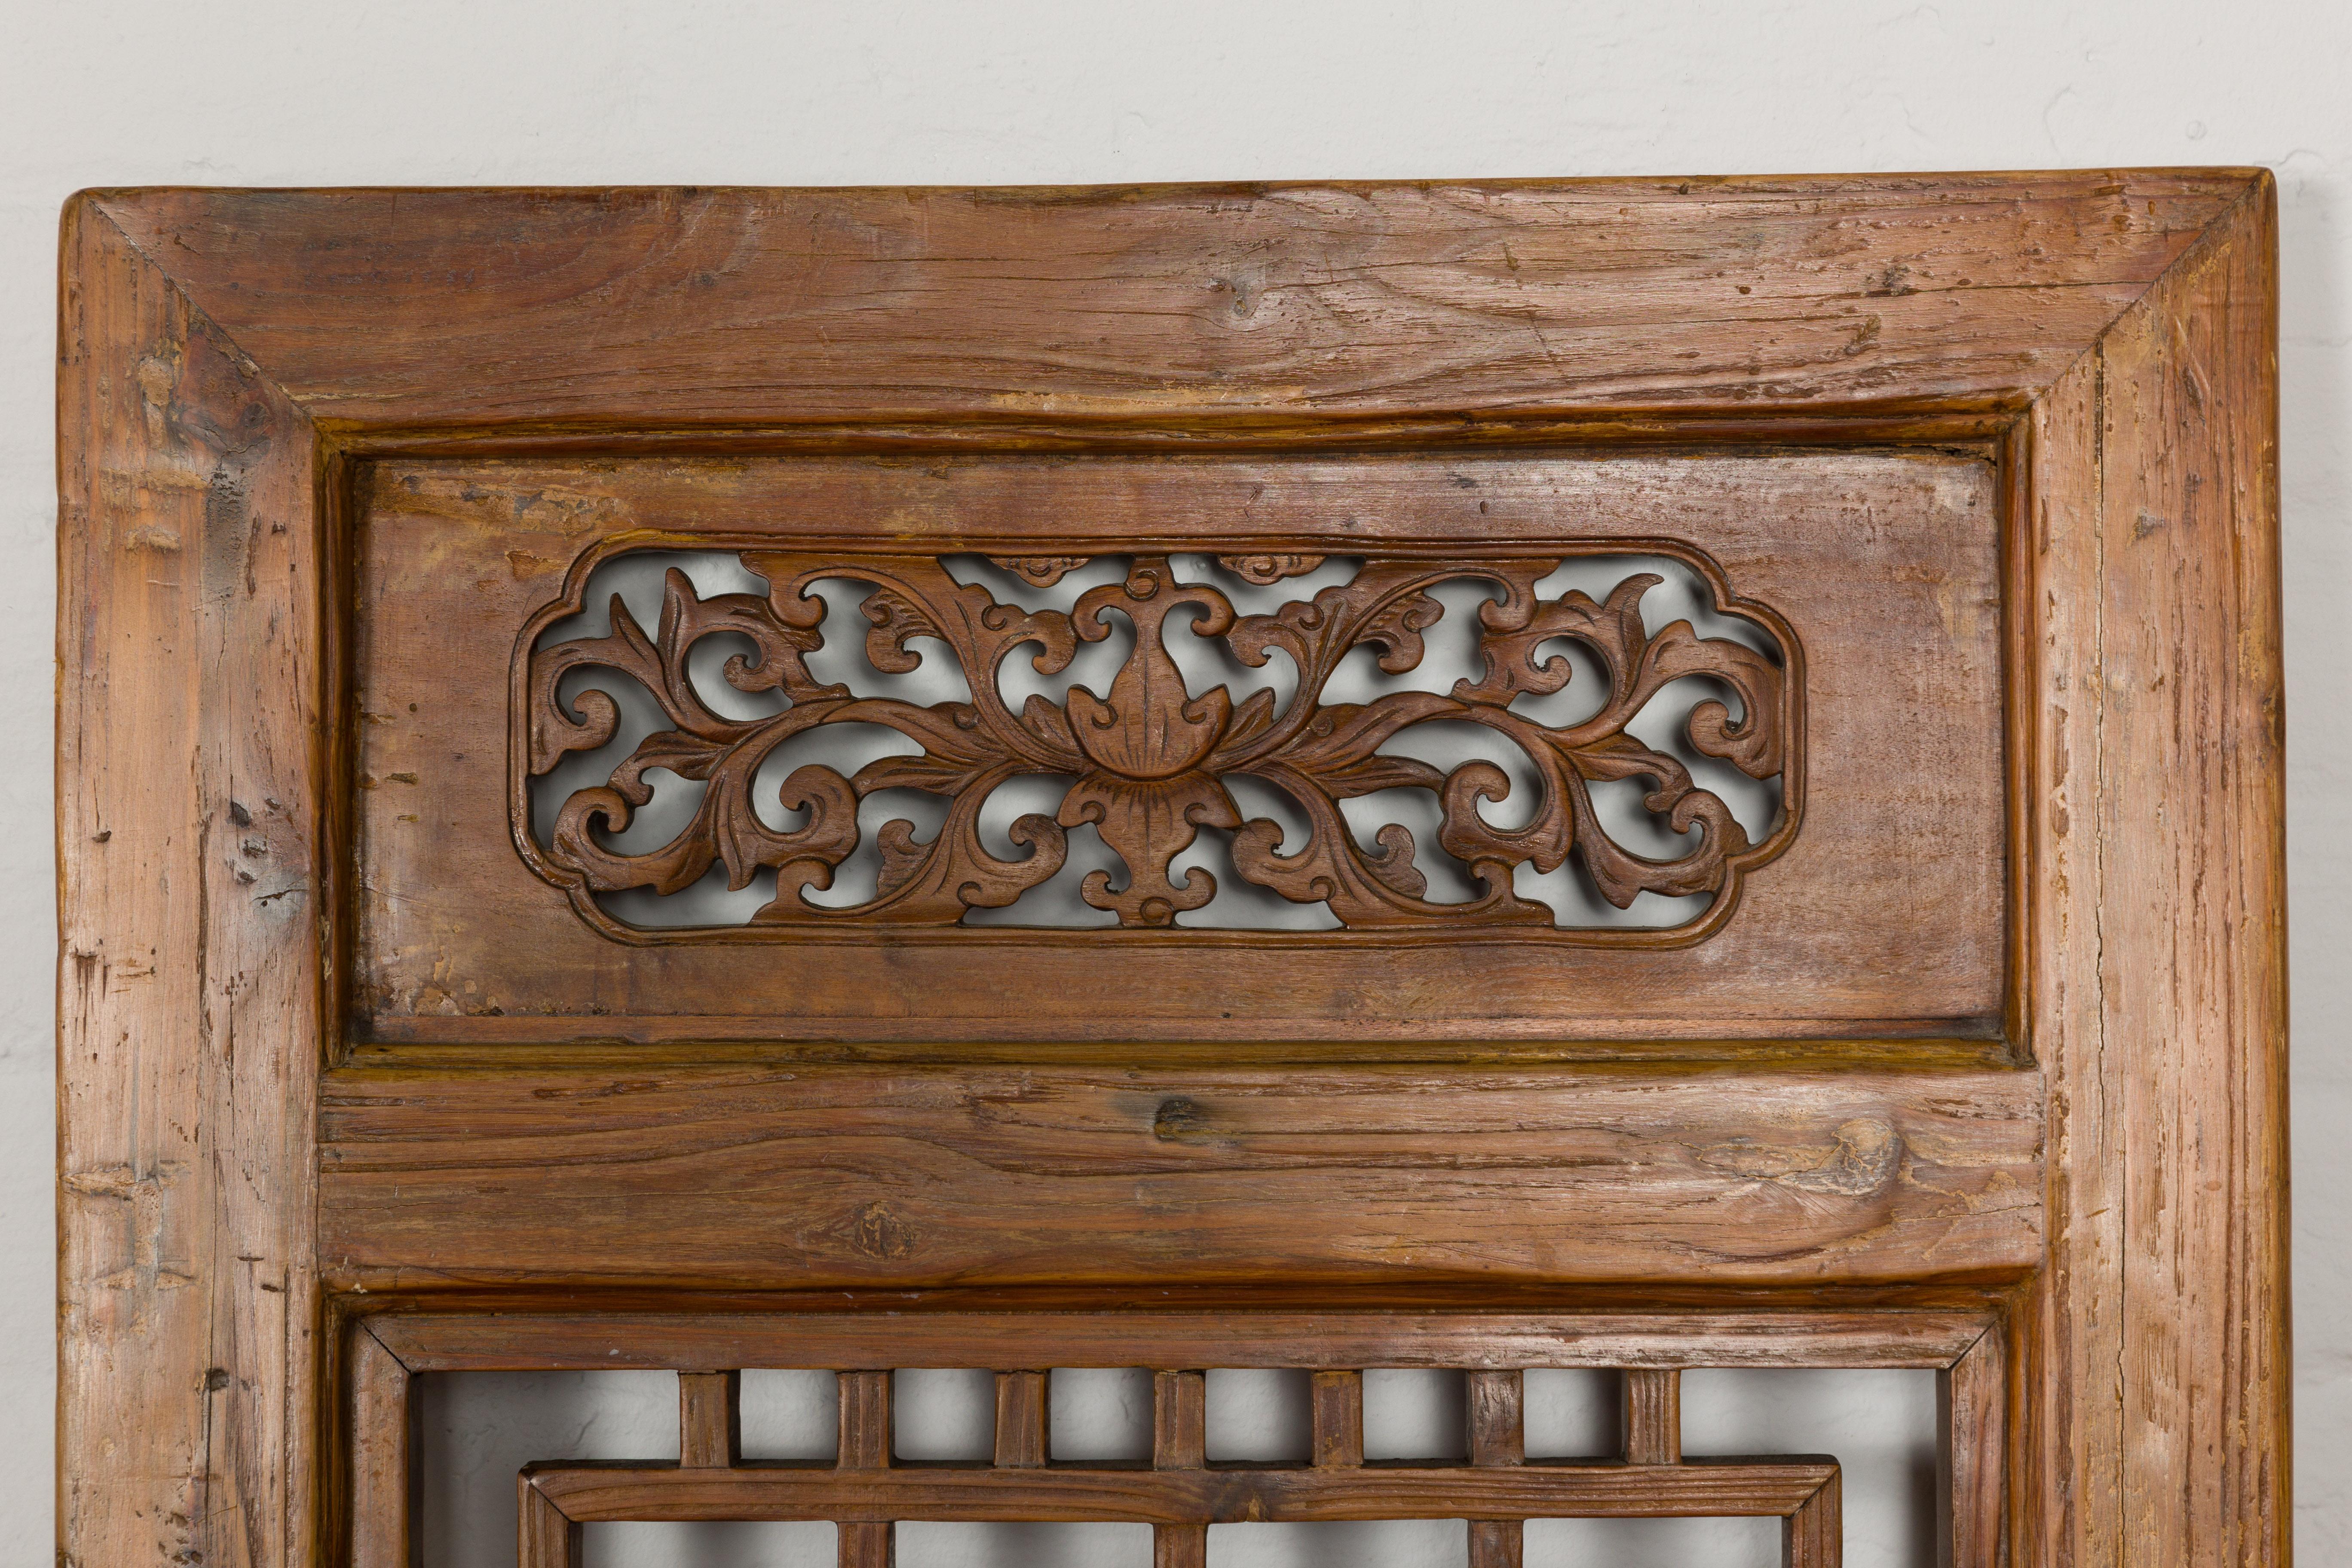 Chinese Qing Dynasty 19th Century Fretwork Screen with Carved Scrolling Motifs For Sale 8